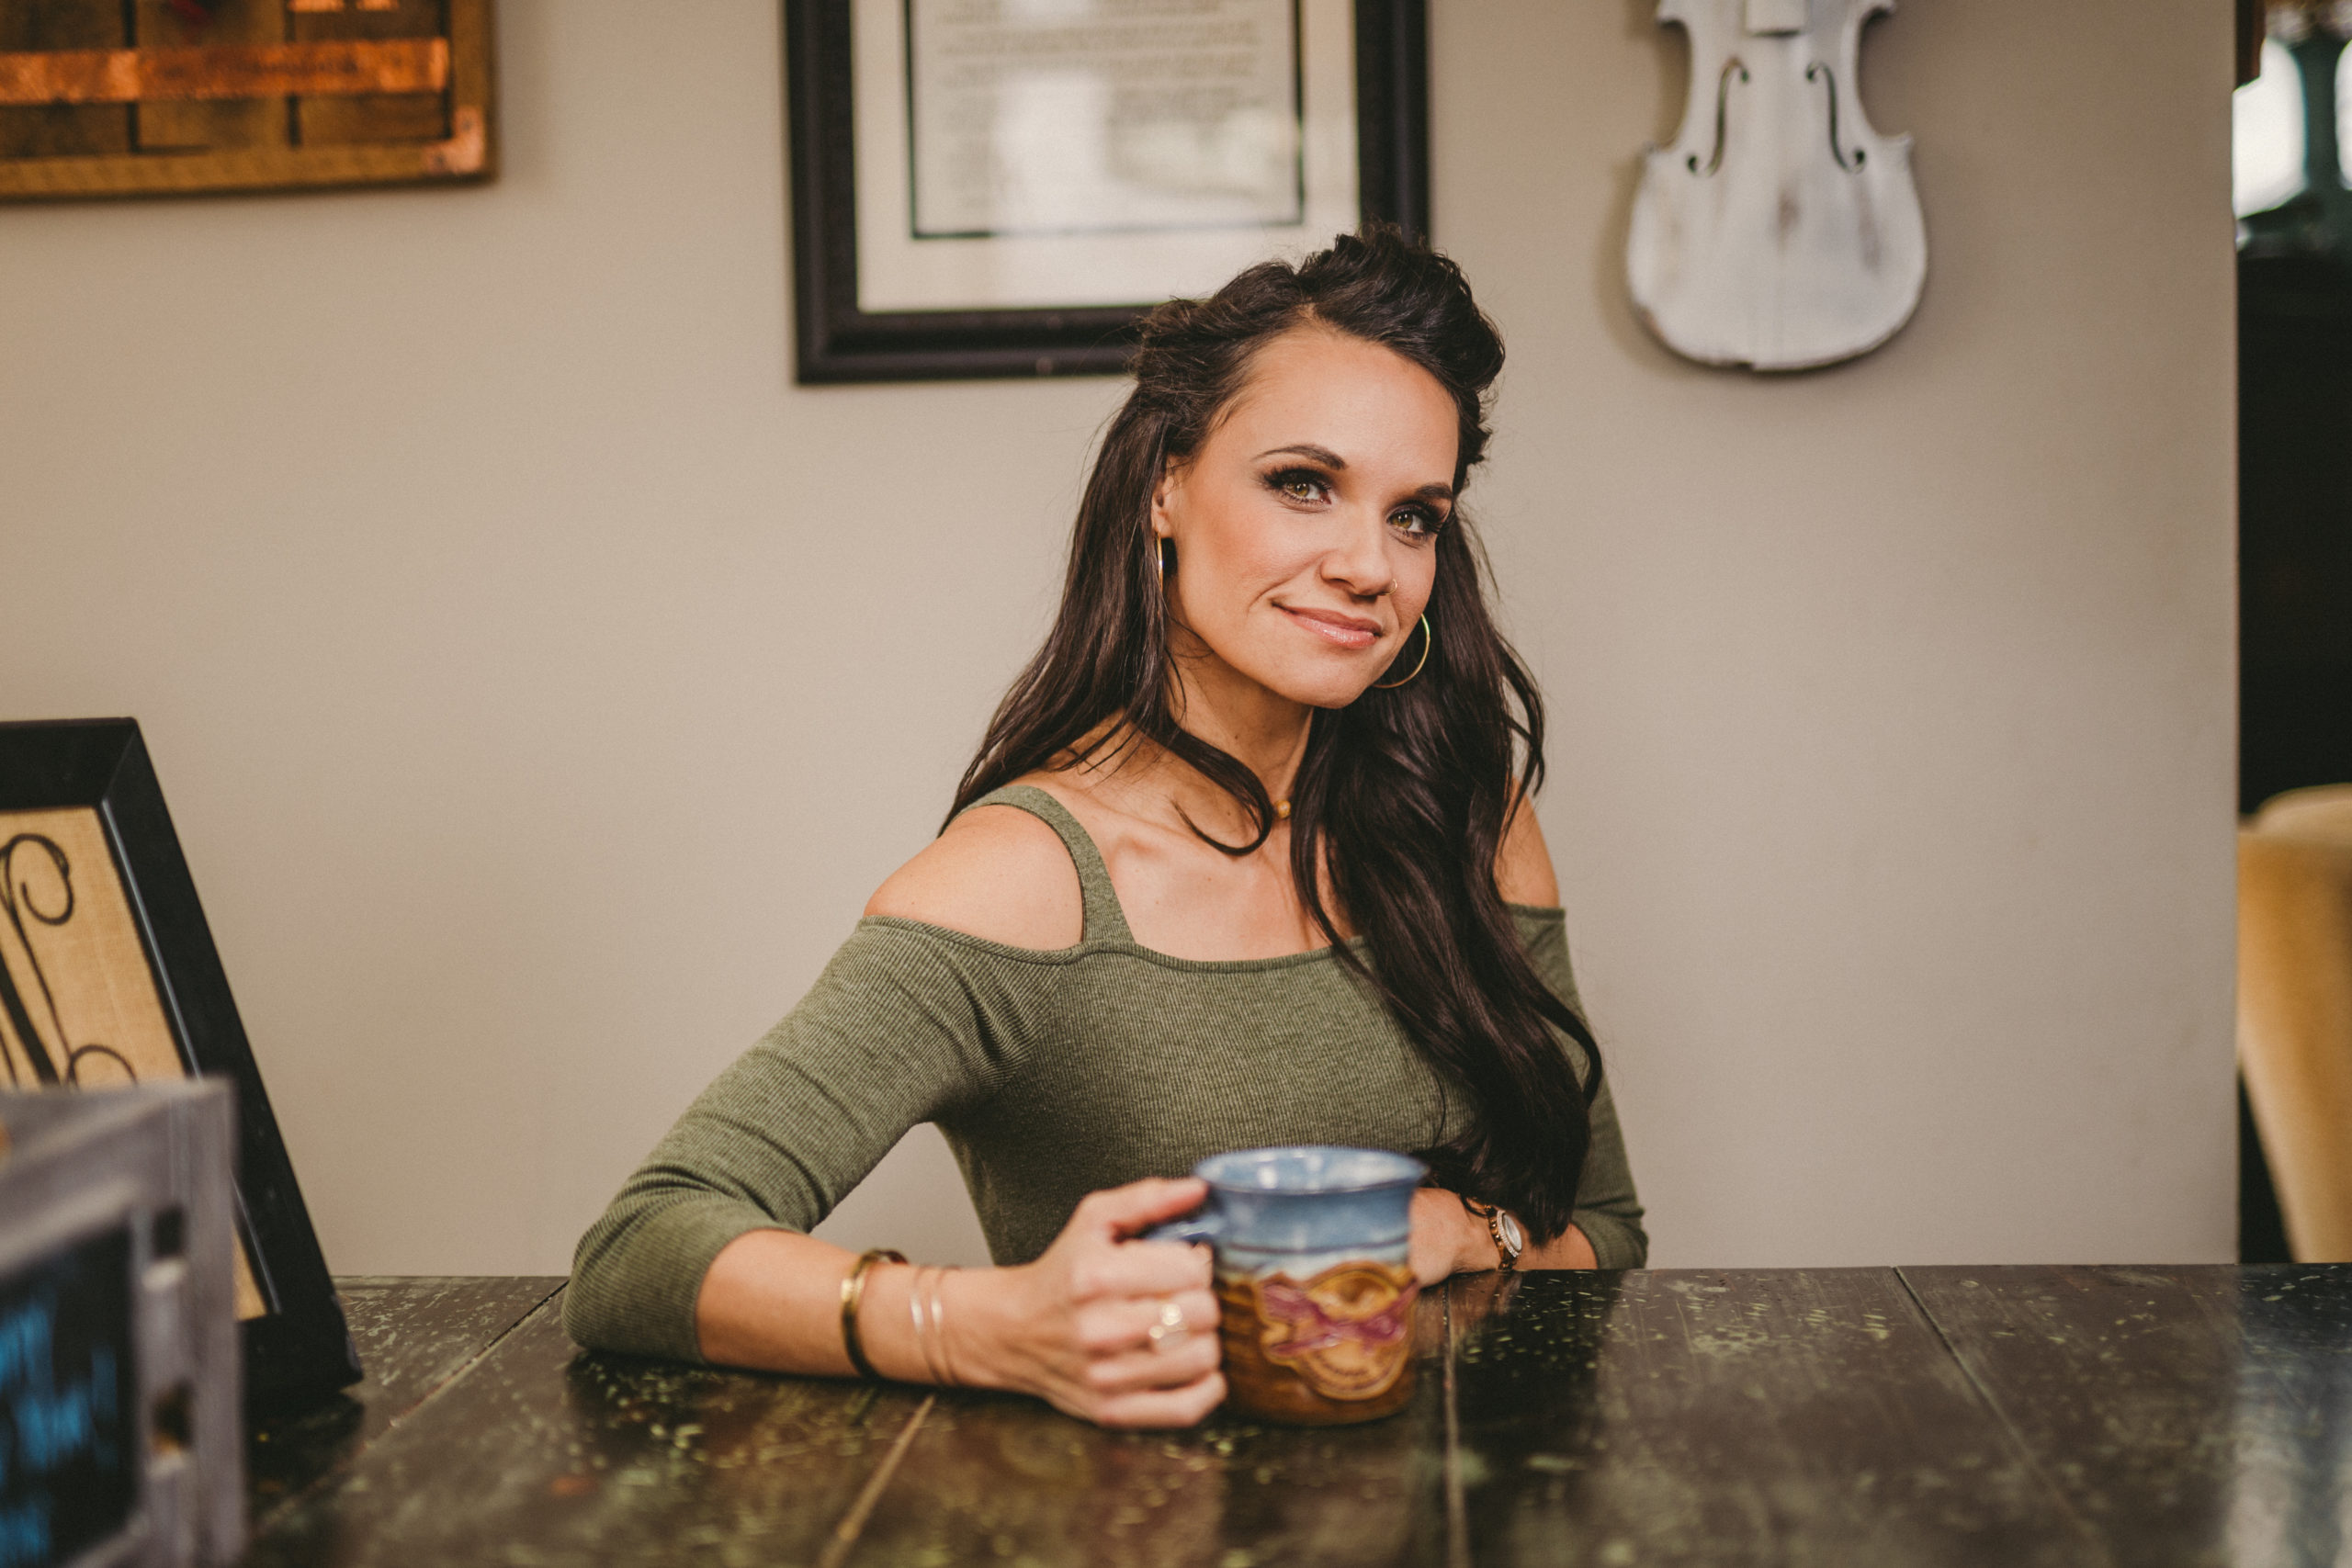 JSM Woman with long brown hair posing for the camera holding a blue and brown coffee cup